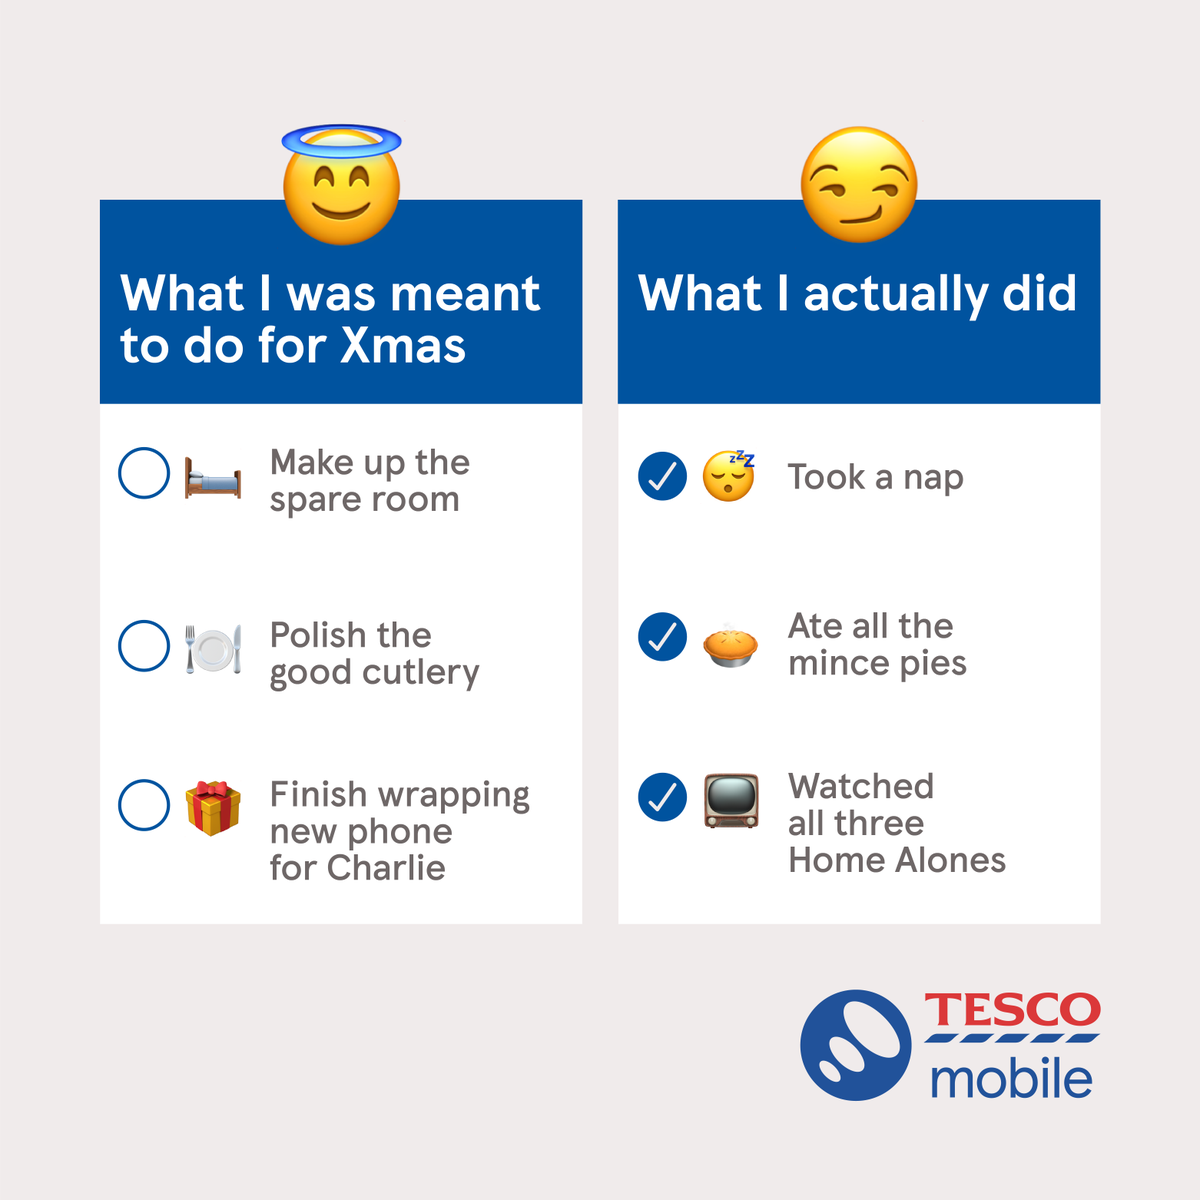 Unlike Santa, we’re not all checking our lists twice. Top Tip: When making your to-do lists, don’t write them out with bullet points. Instead use the ‘check mark’ feature in your notes app so you can enjoy that ‘done it’ feeling. #TescoMobile #TodoList #ChristmasLists